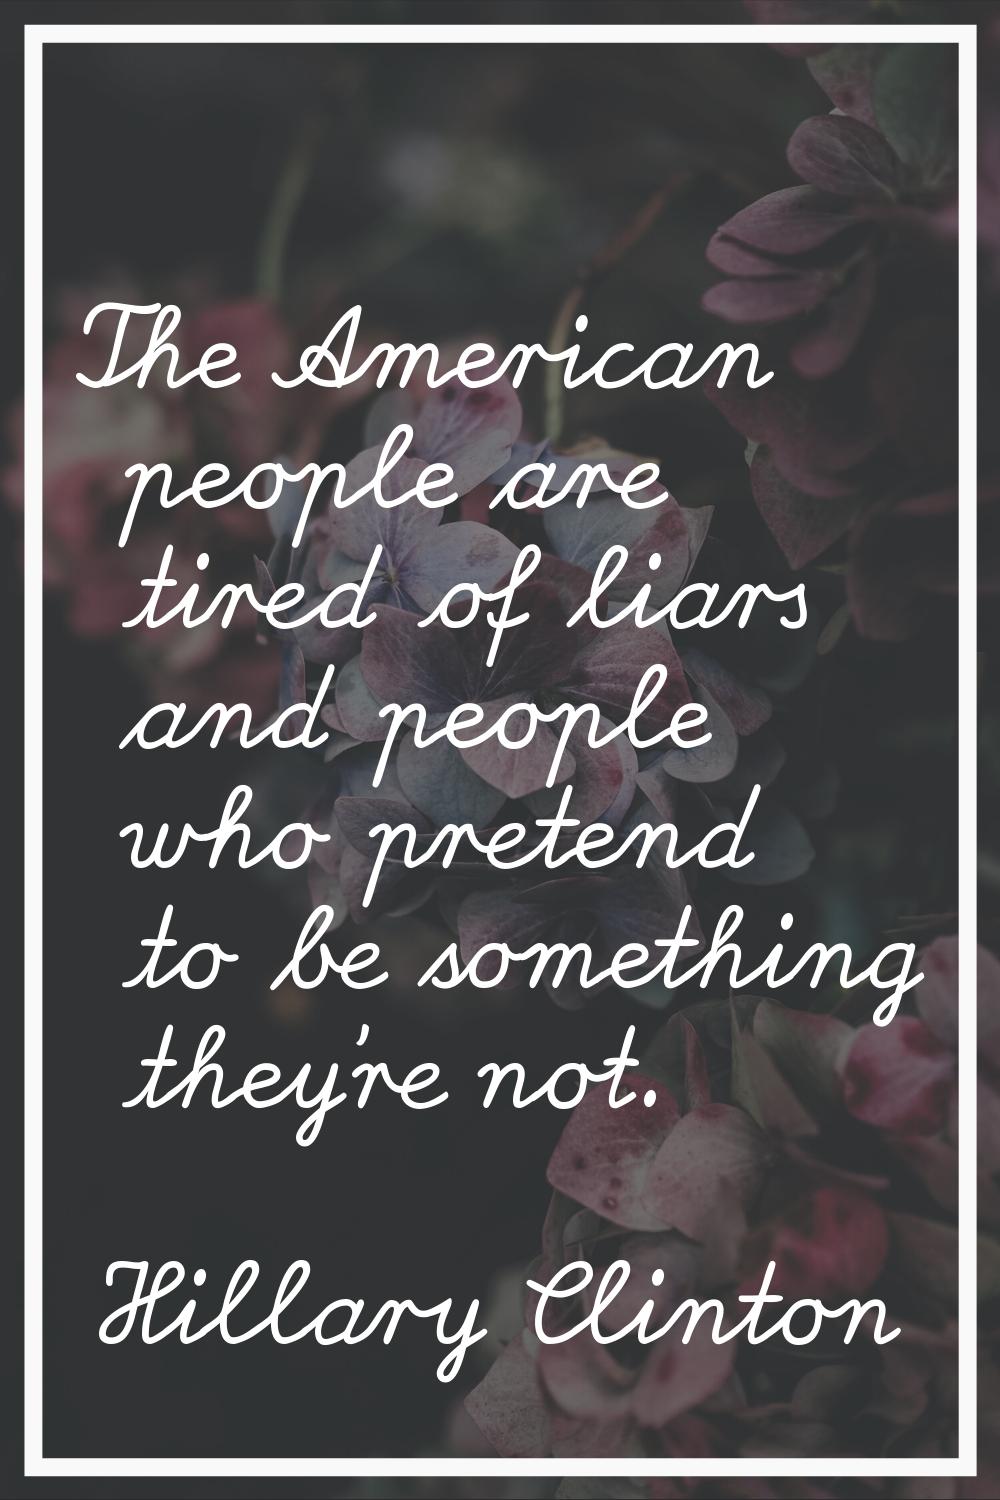 The American people are tired of liars and people who pretend to be something they're not.